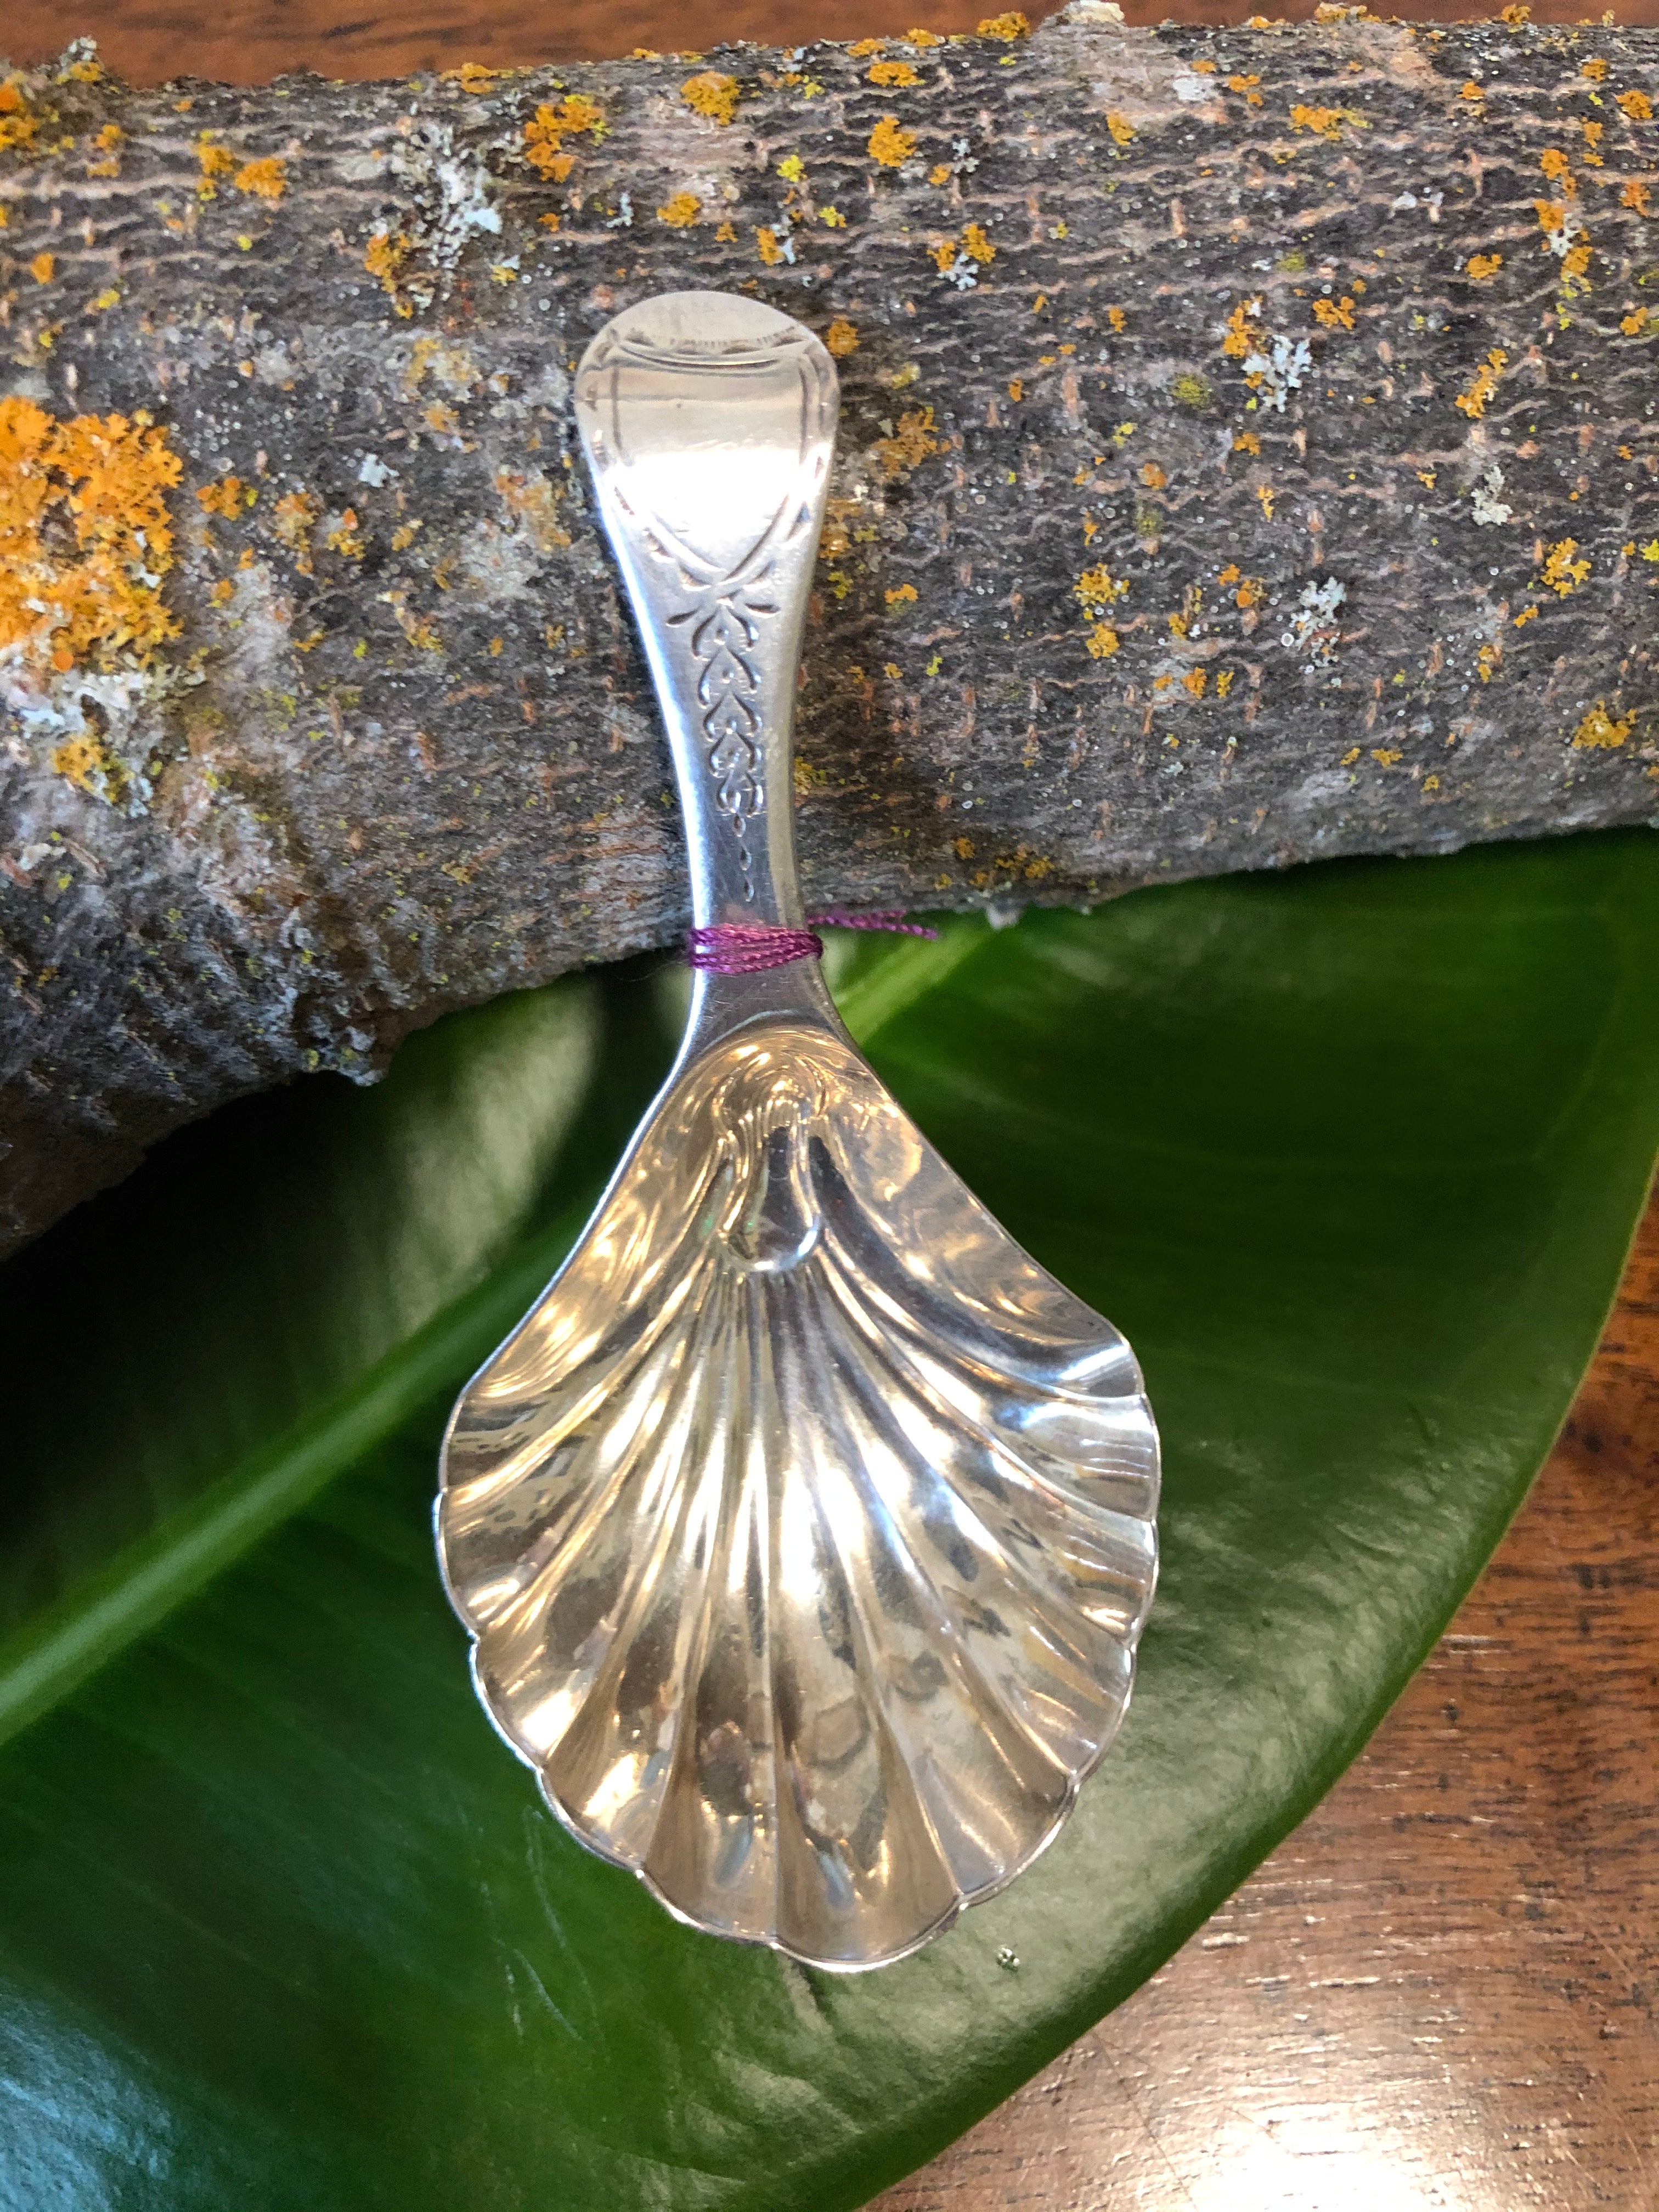 George III Sterling Silver Caddy Spoon by George Baskerville, 1795.